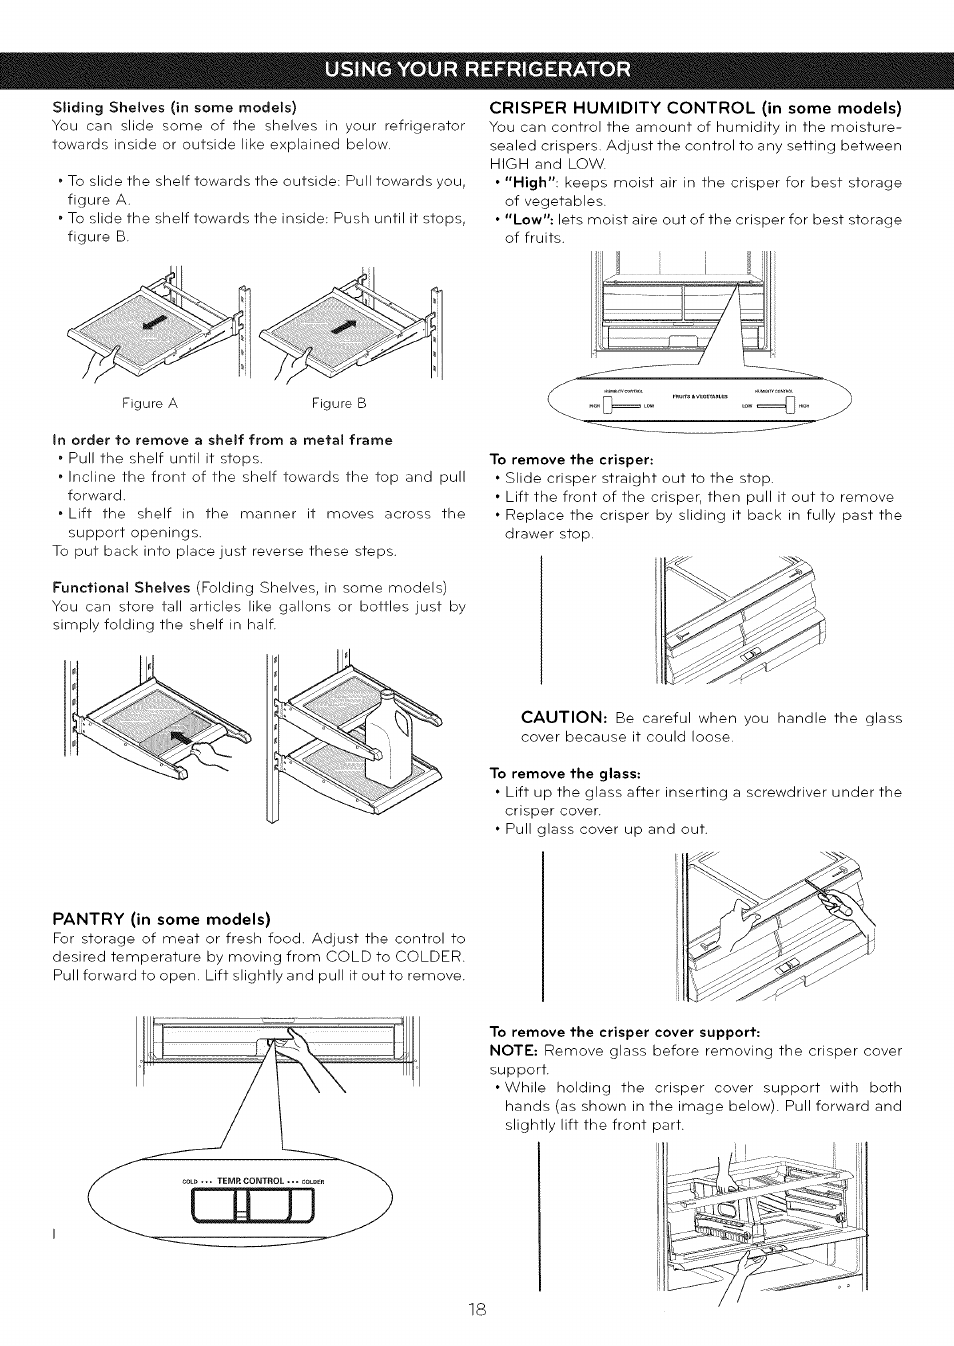 Sliding shelves (in some models), Pantry (in some models), Crisper humidity control (in some models) | In order to remove a shelf from a metal frame, To remove the crisper, To remove the glass, To remove the crisper cover support, Using your refrigerator | LG LFC25765 User Manual | Page 19 / 31